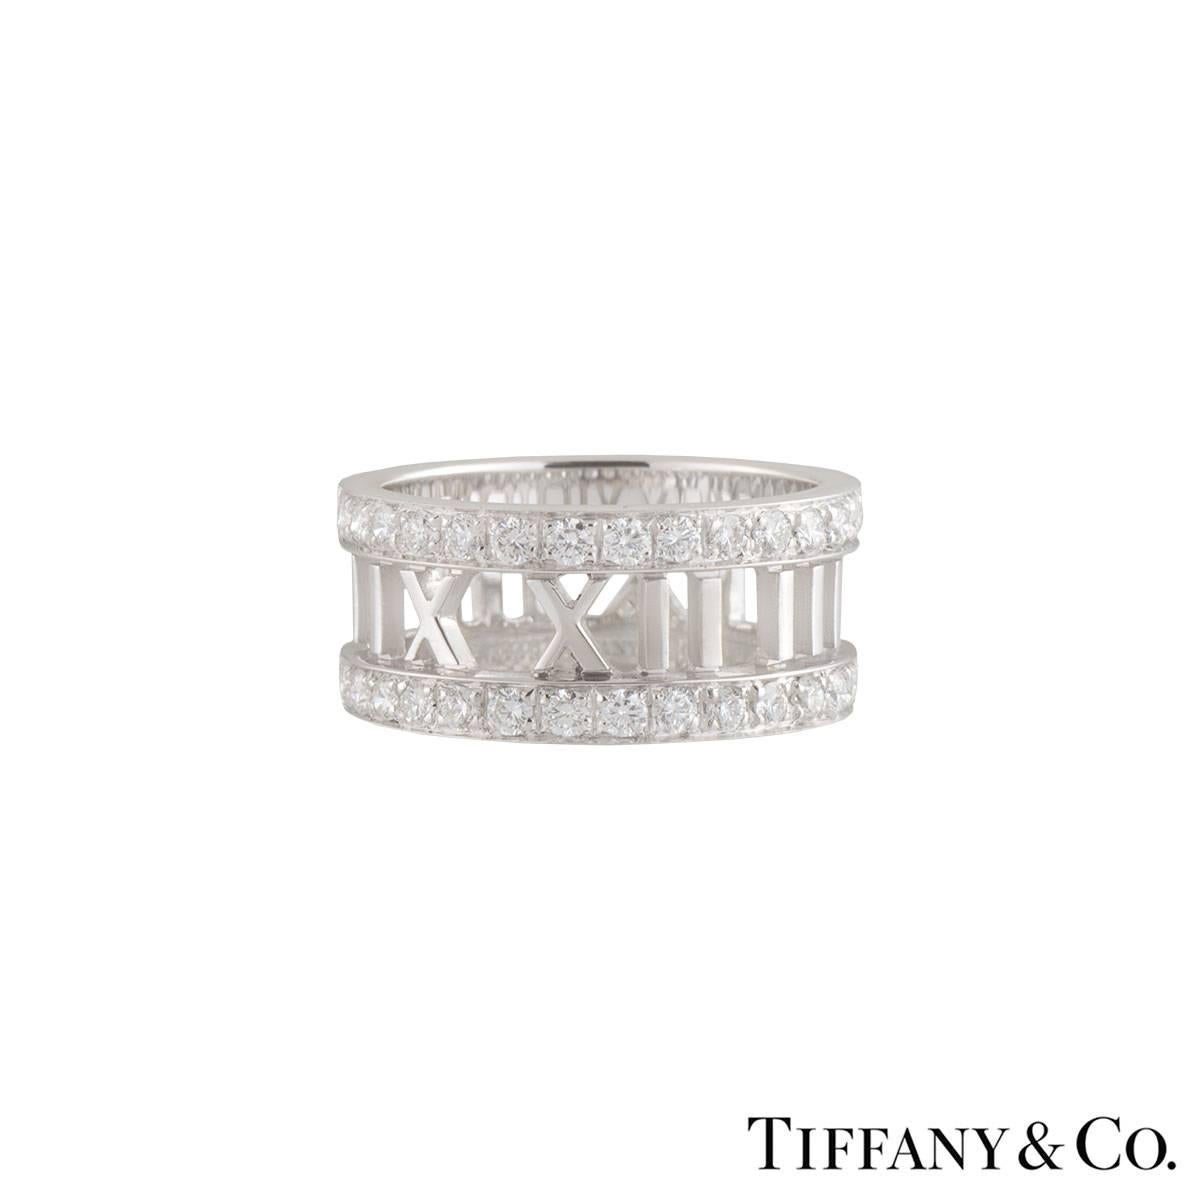 A beautiful 18k white gold diamond Tiffany & Co. dress ring from the Atlas collection. The ring comprises of the the iconic open work atlas motif around the ring with round brilliant cut diamonds set on the top and bottom of the band. There are 30